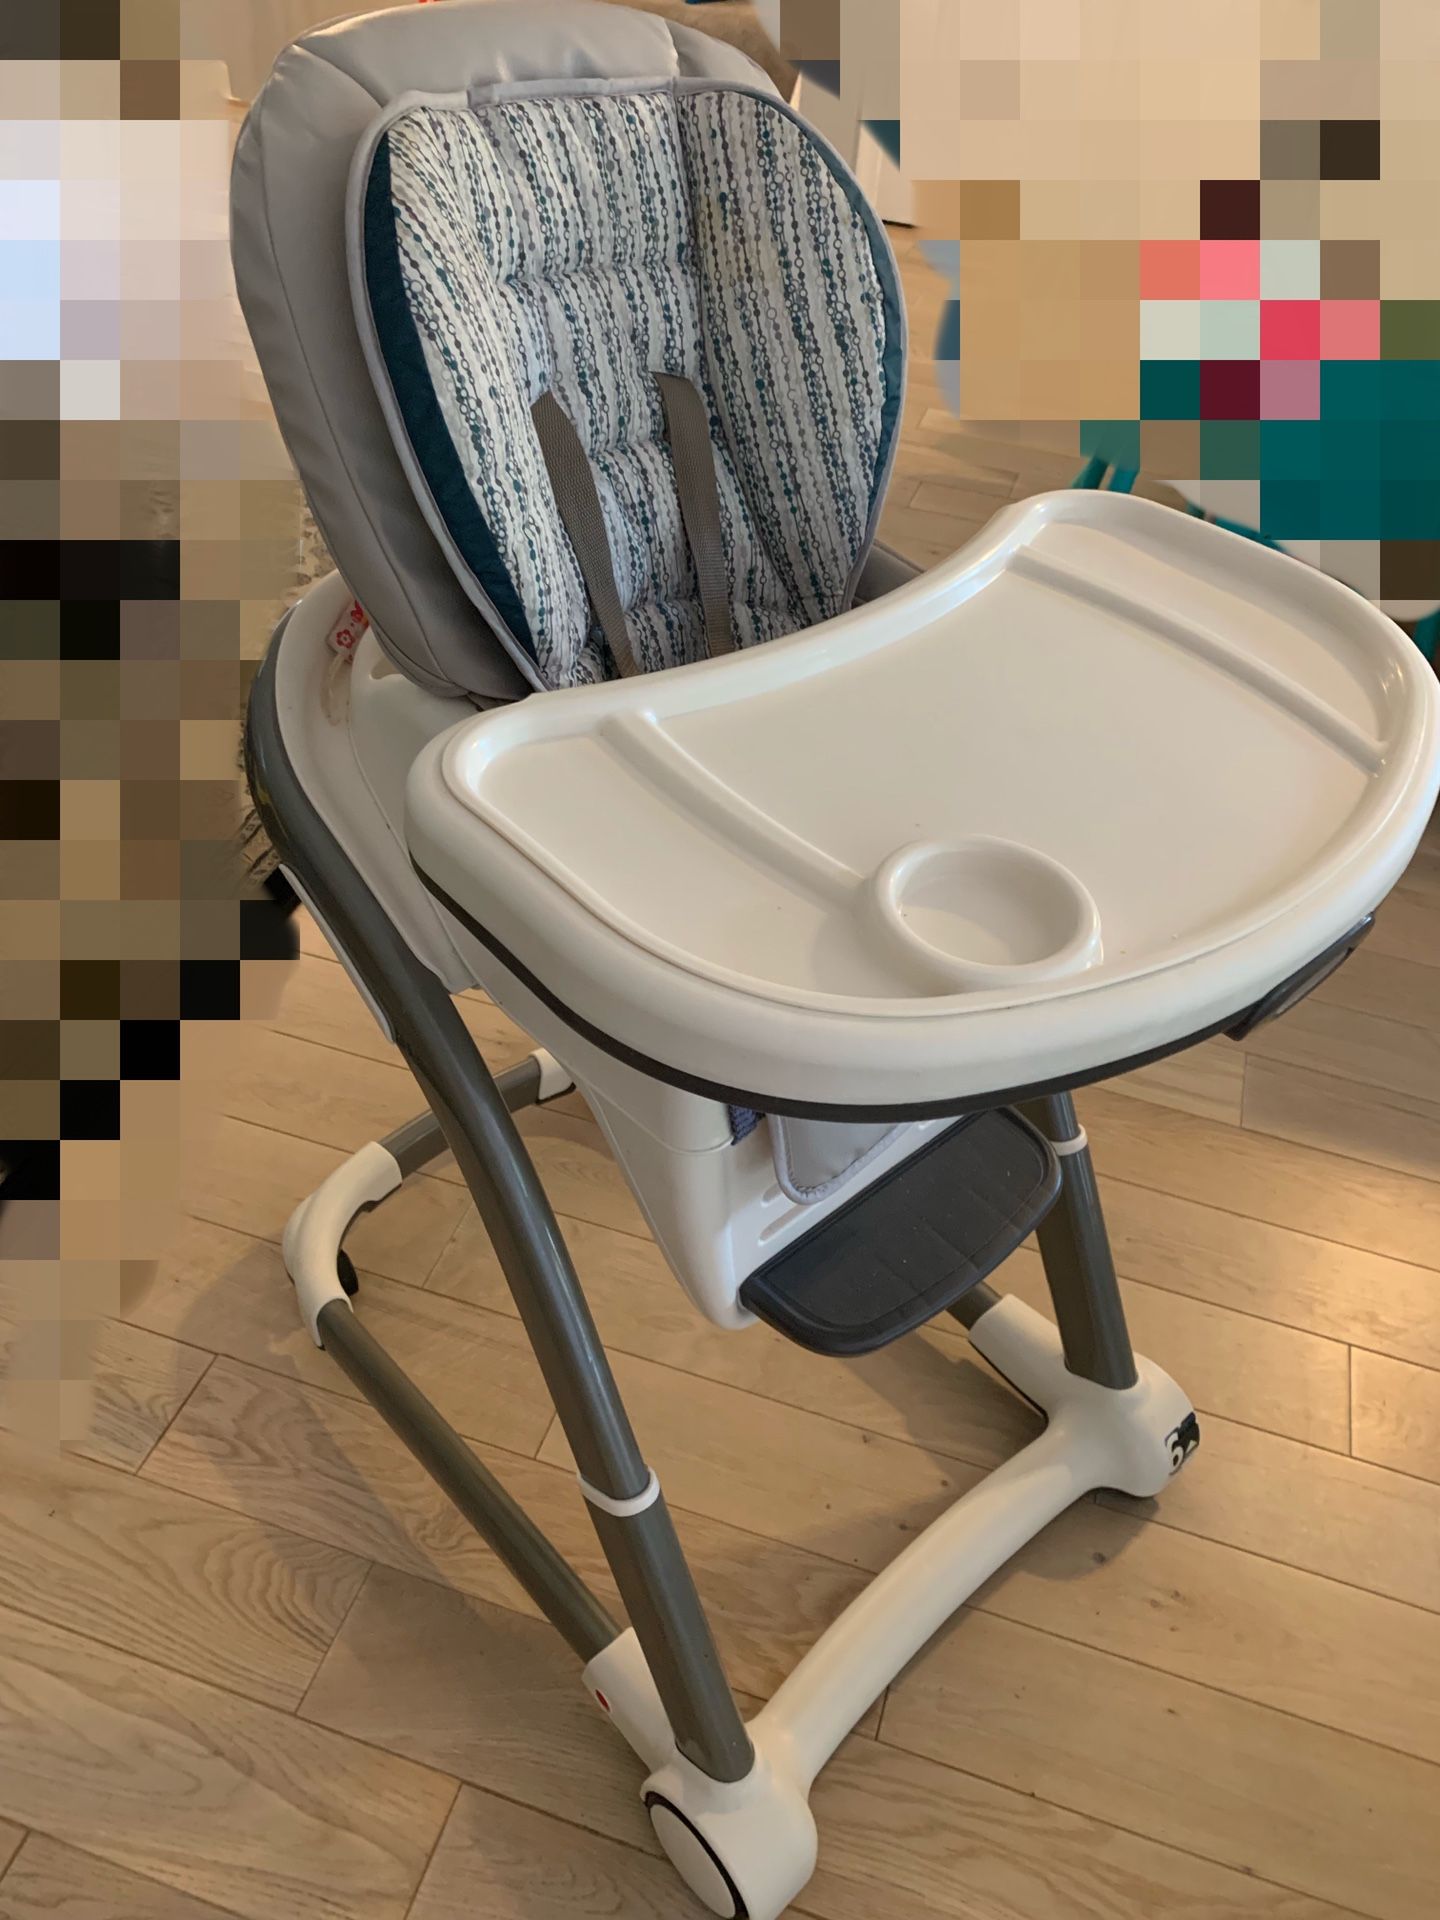 Like New: Graco Blossom 6 in 1 Highchair